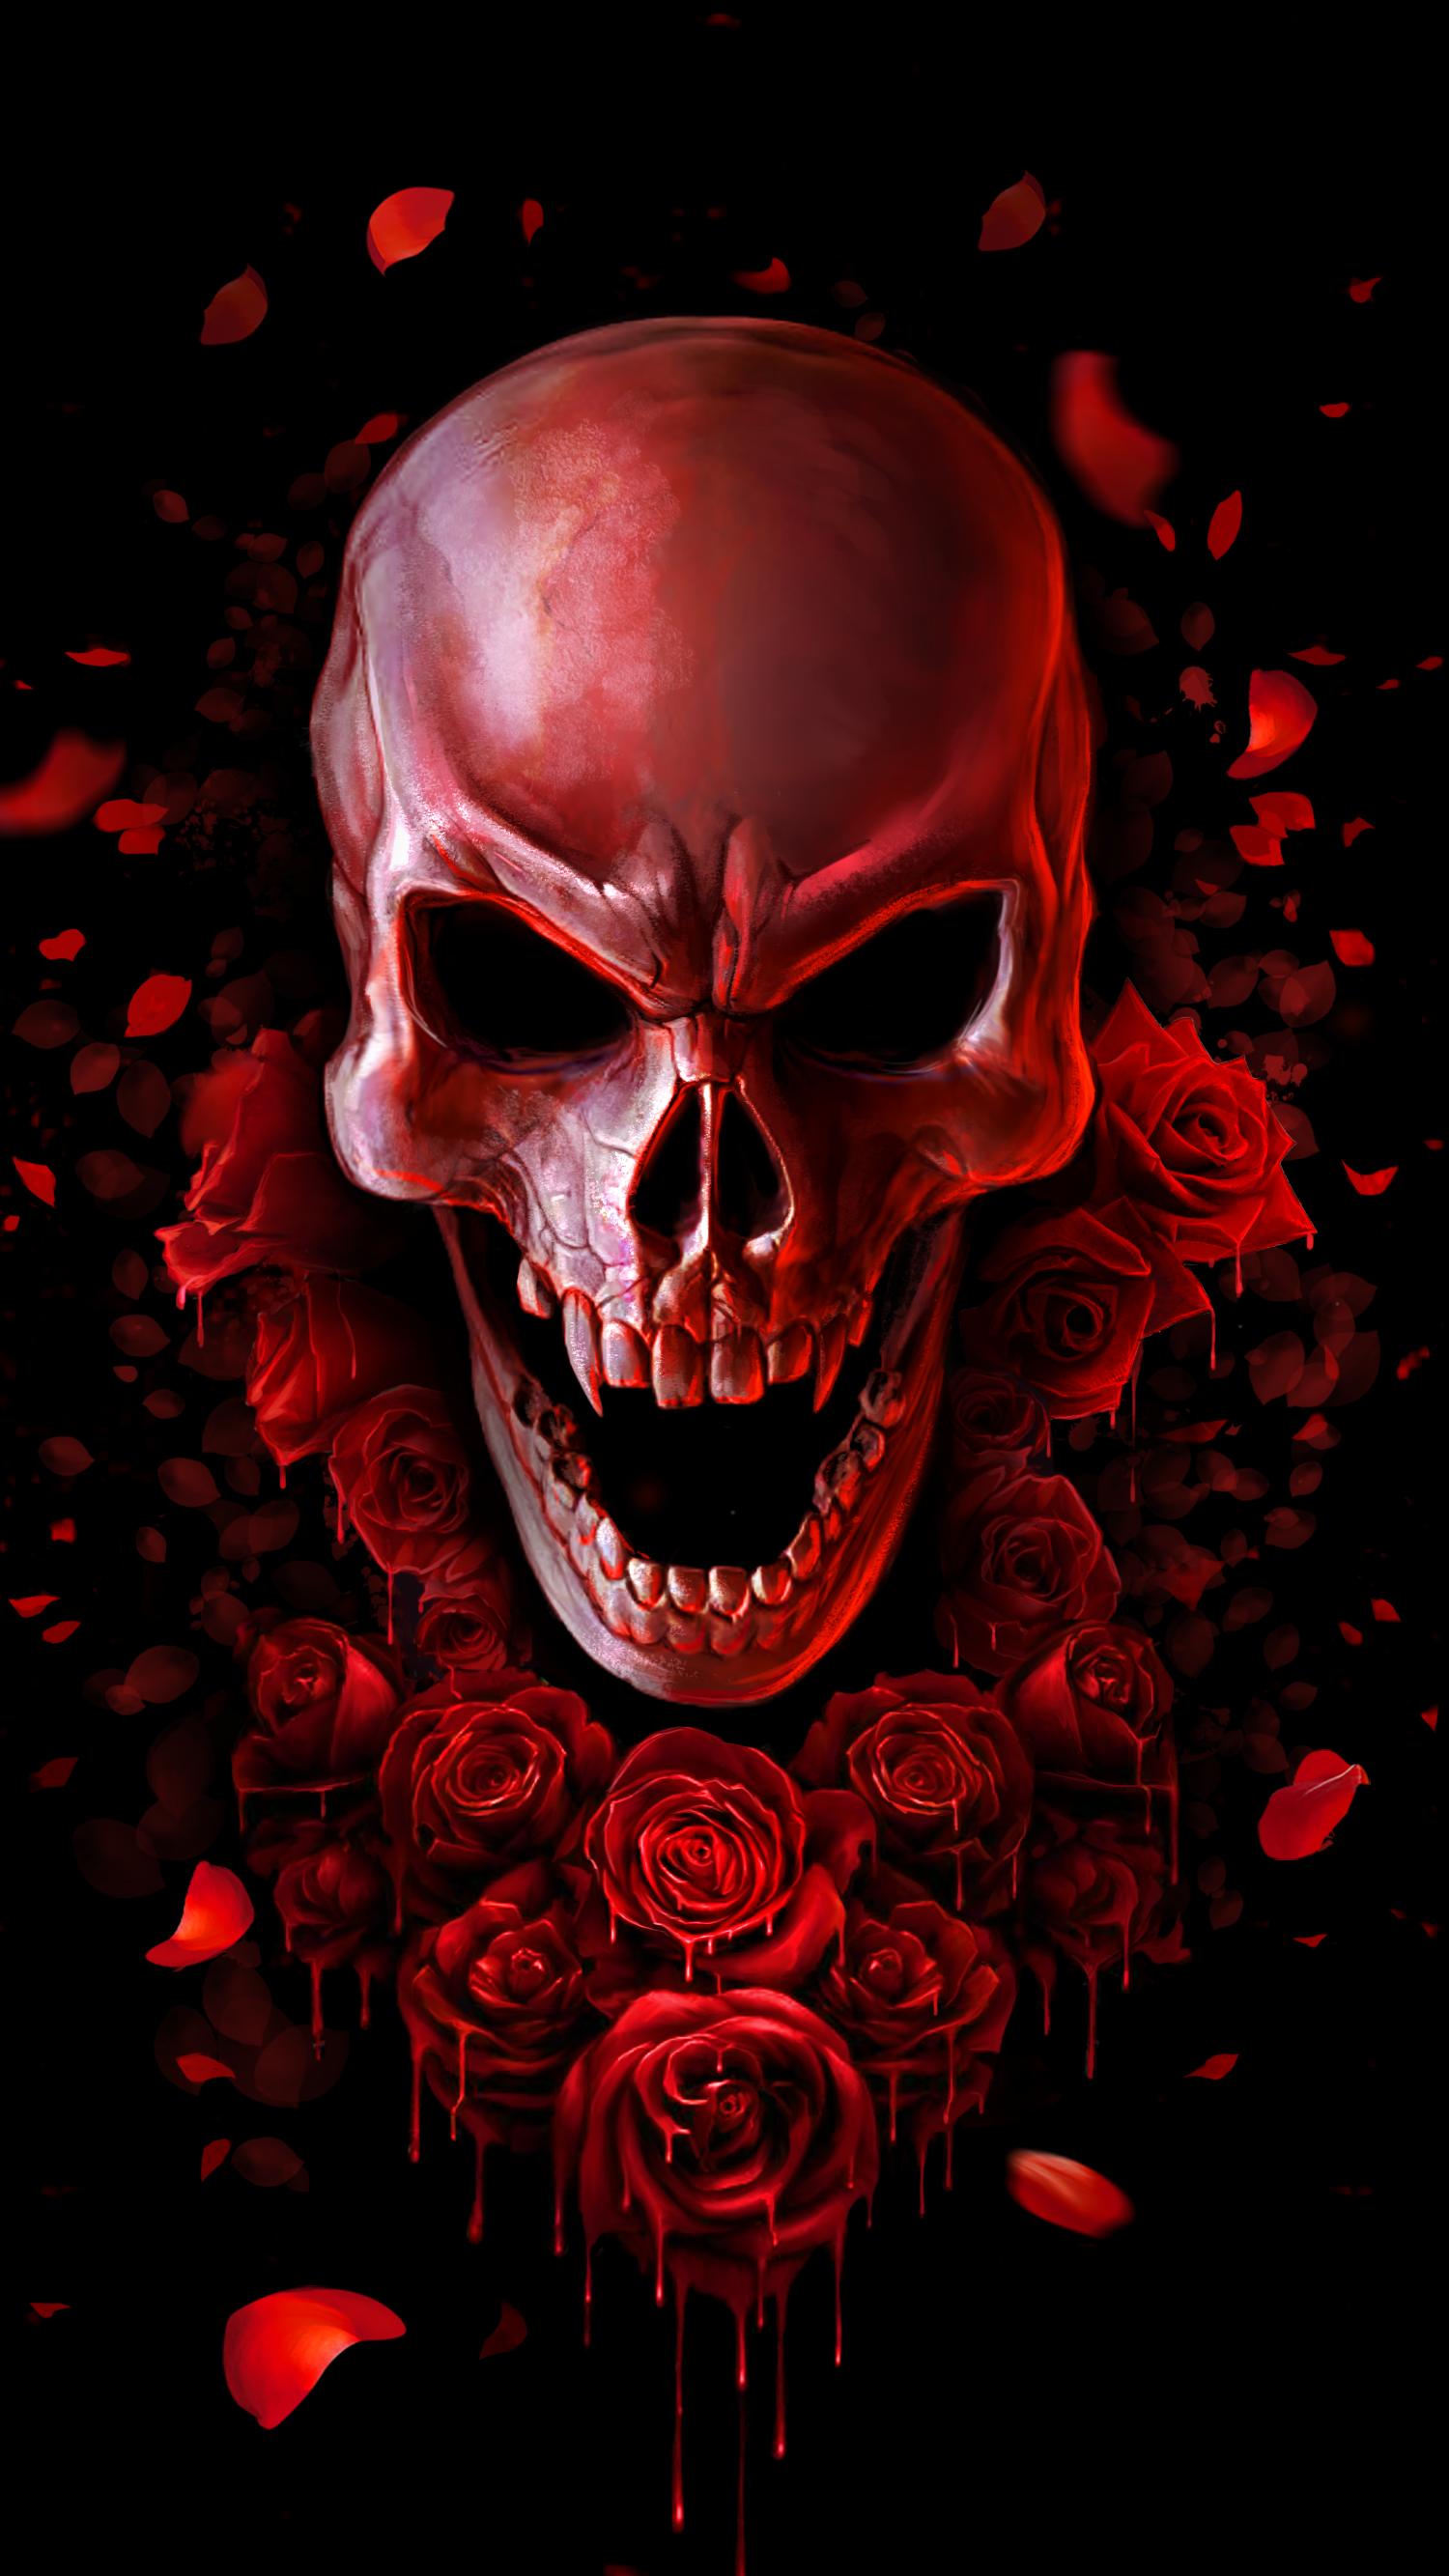 Red Blood Skull Live Wallpaper for Android